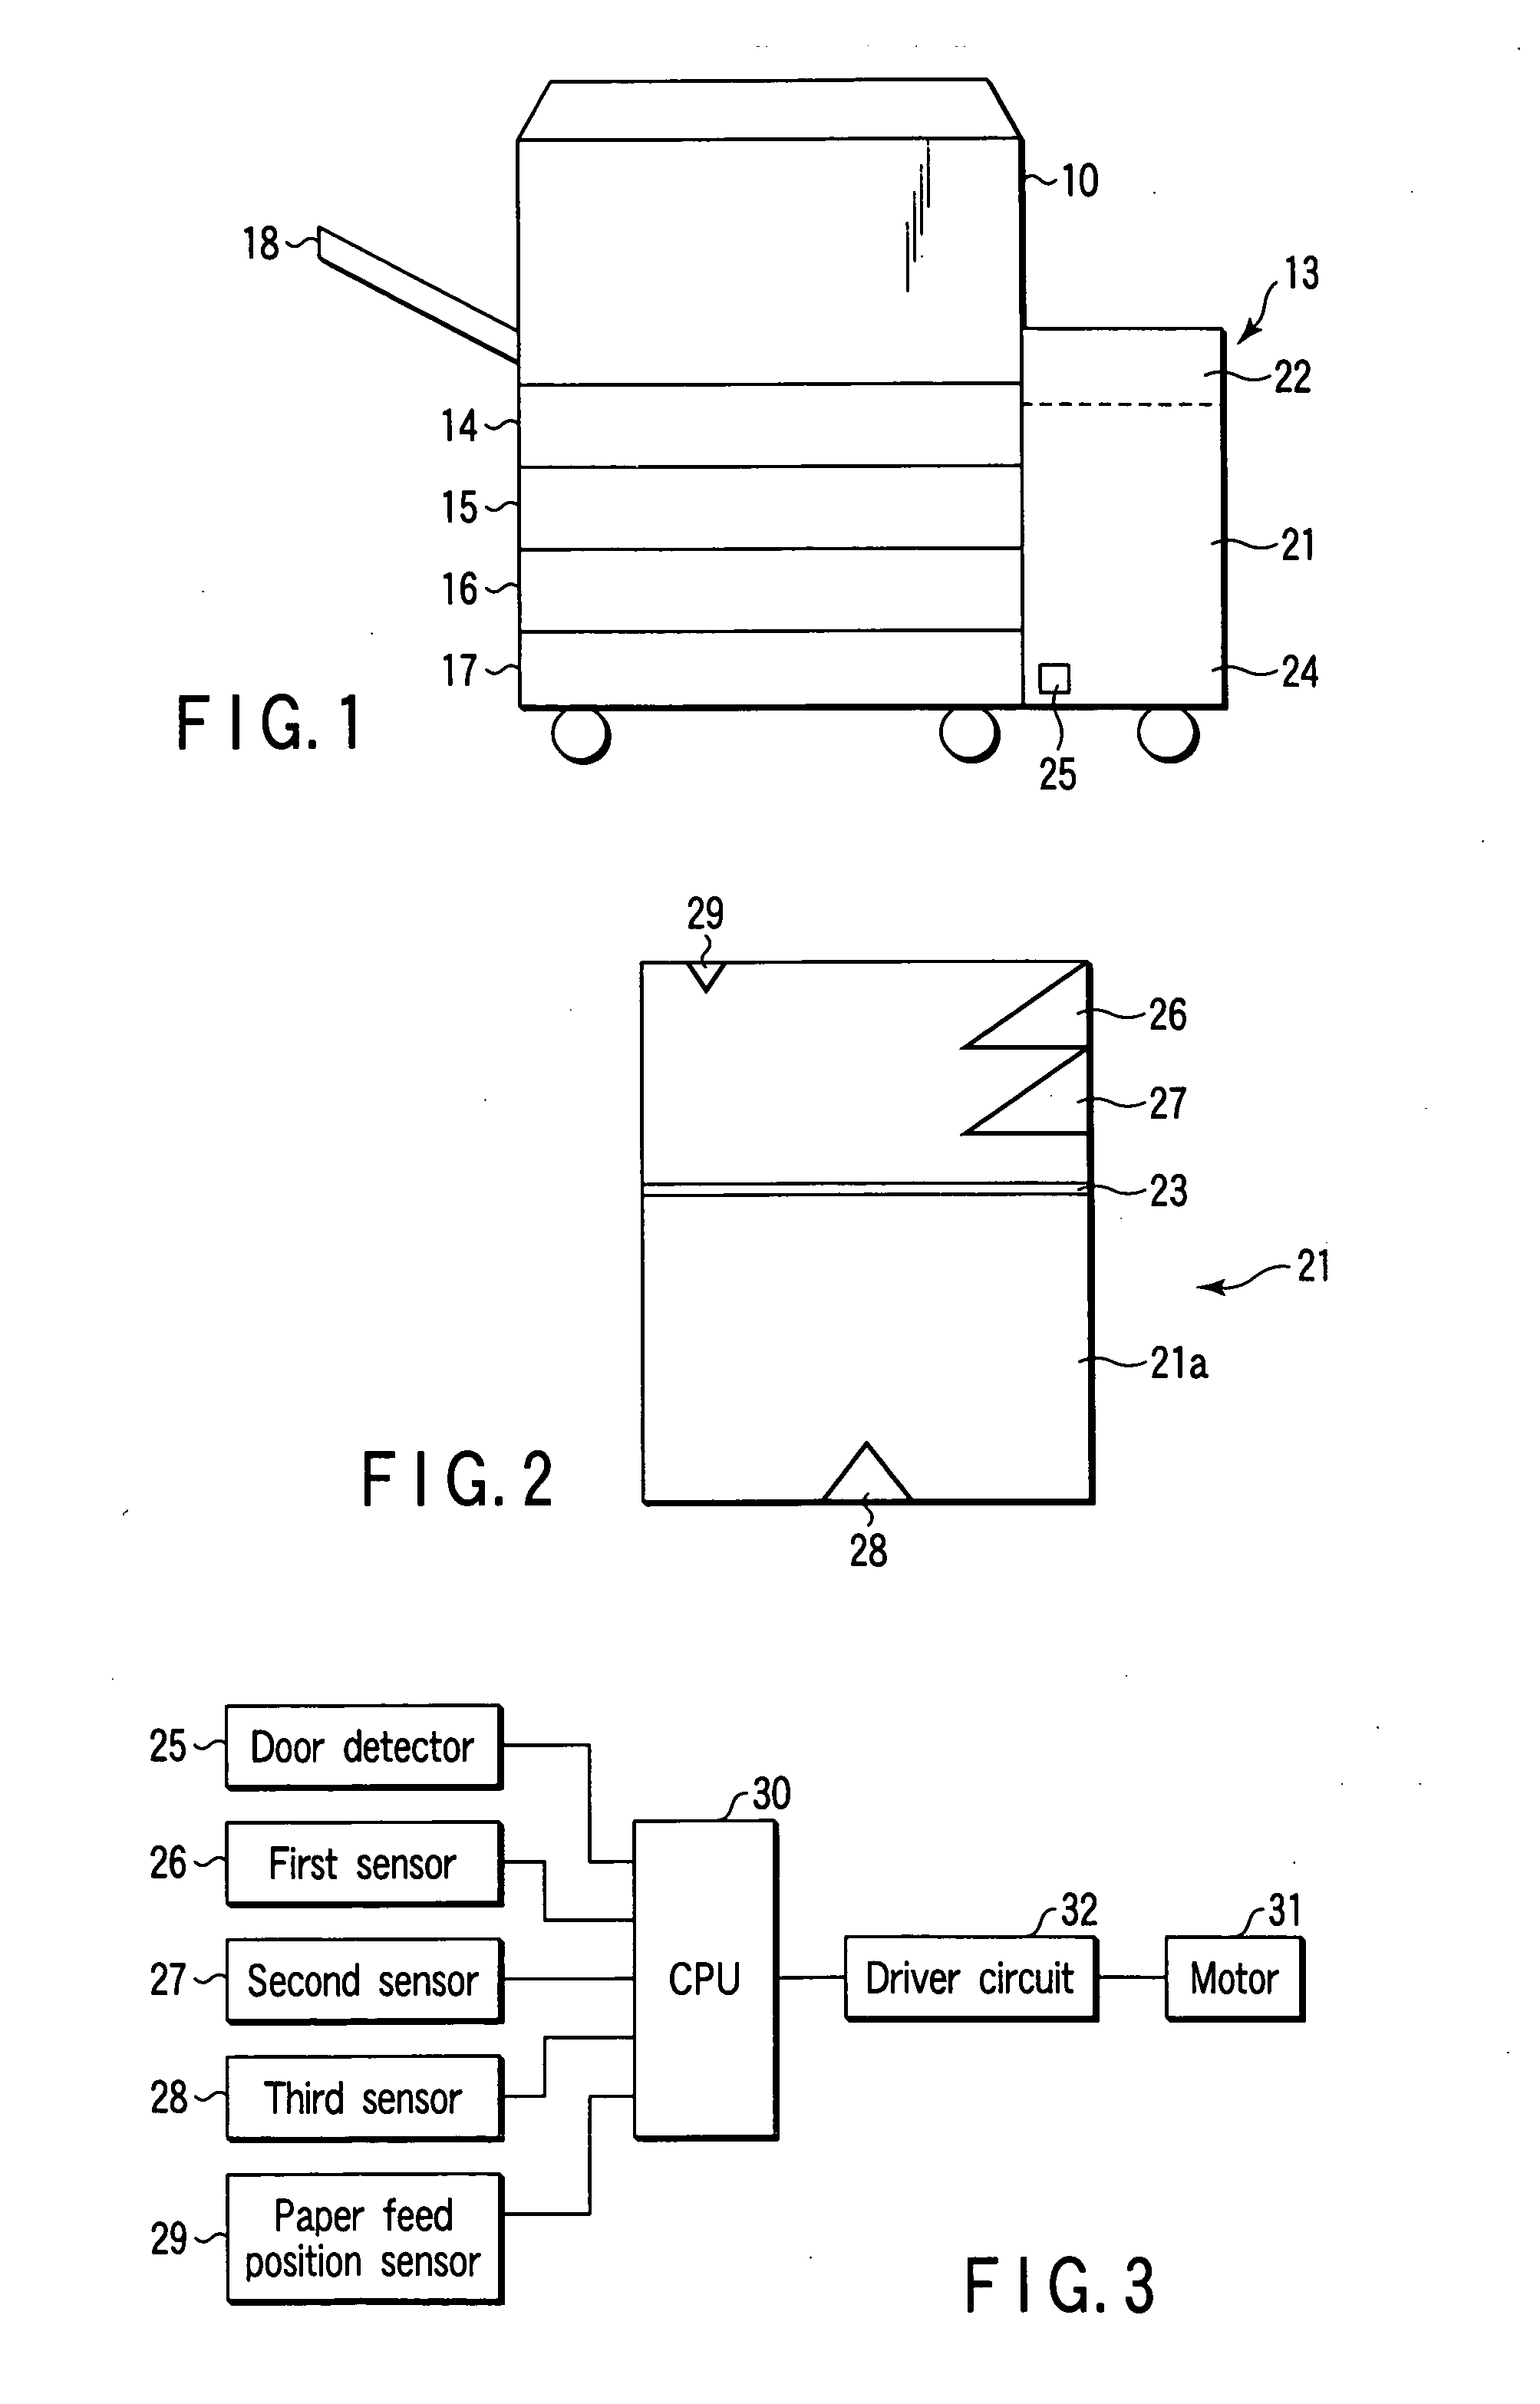 Feed paper apparatus